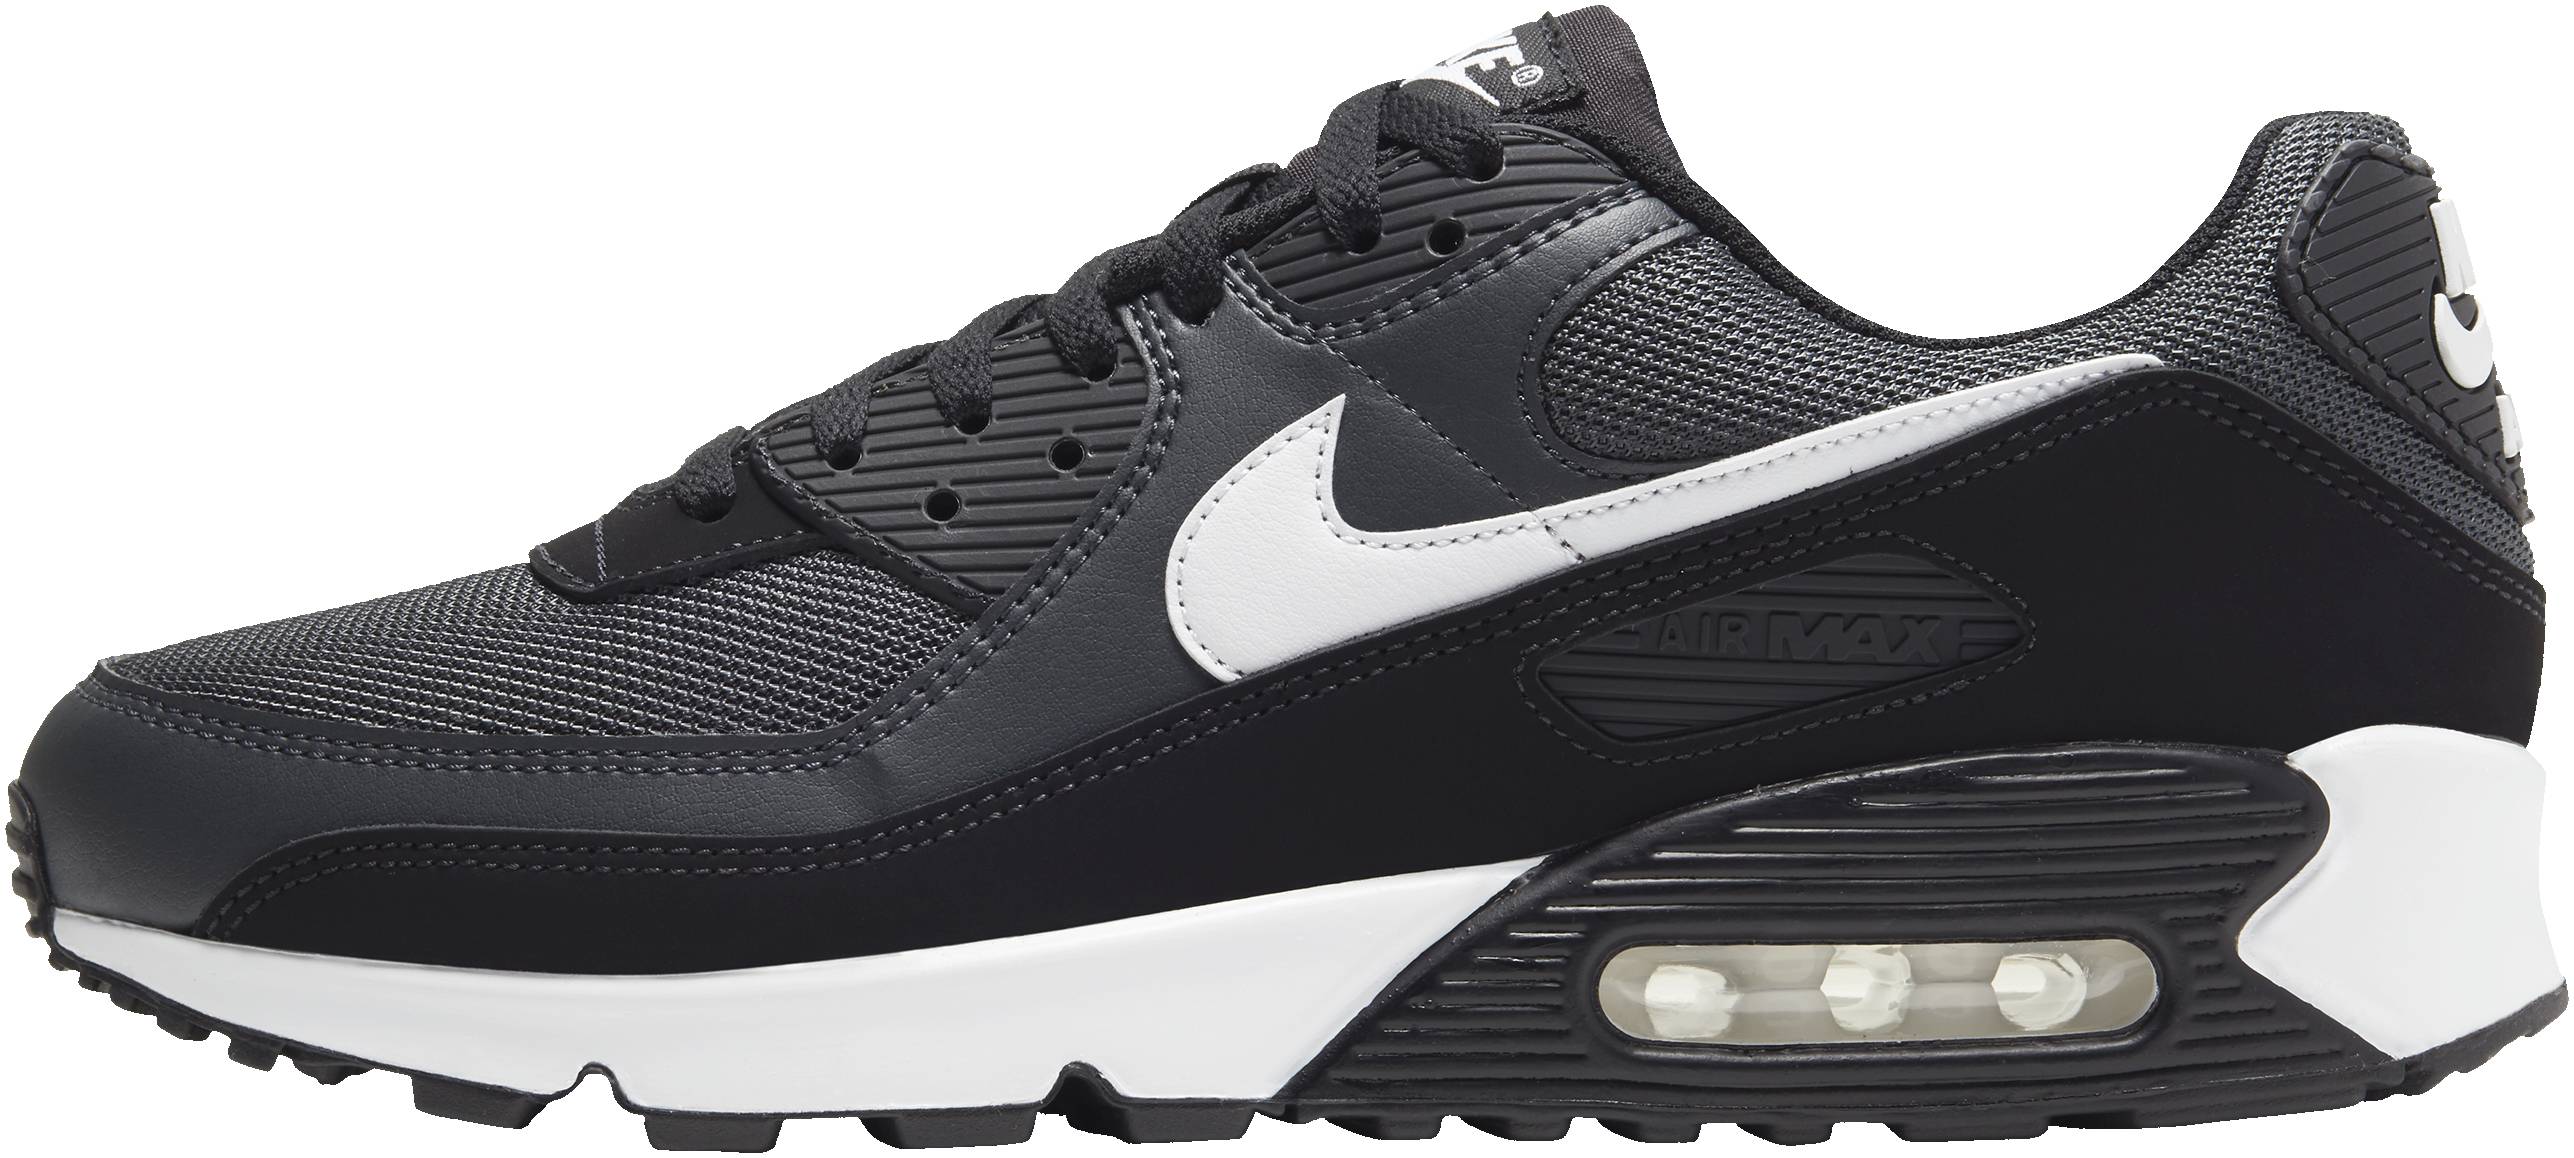 Only $69 + Review of Nike Air Max 90 